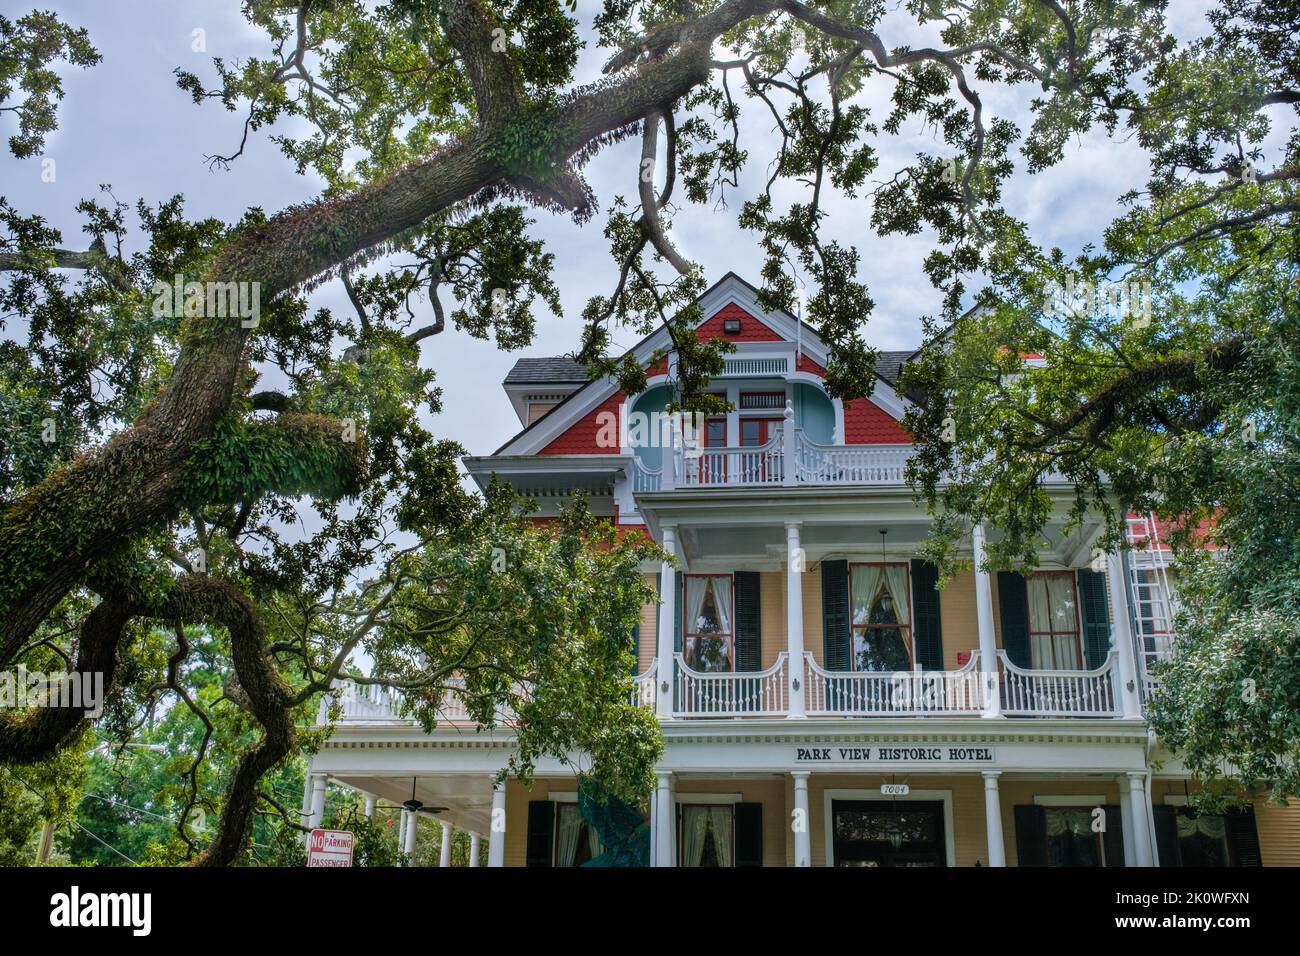 NEW ORLEANS, LA, USA - SEPTEMBER 7, 2022: Upper level of the Parkview Historic Hotel and a sprawling live oak tree on St. Charles Avenue Stock Photo